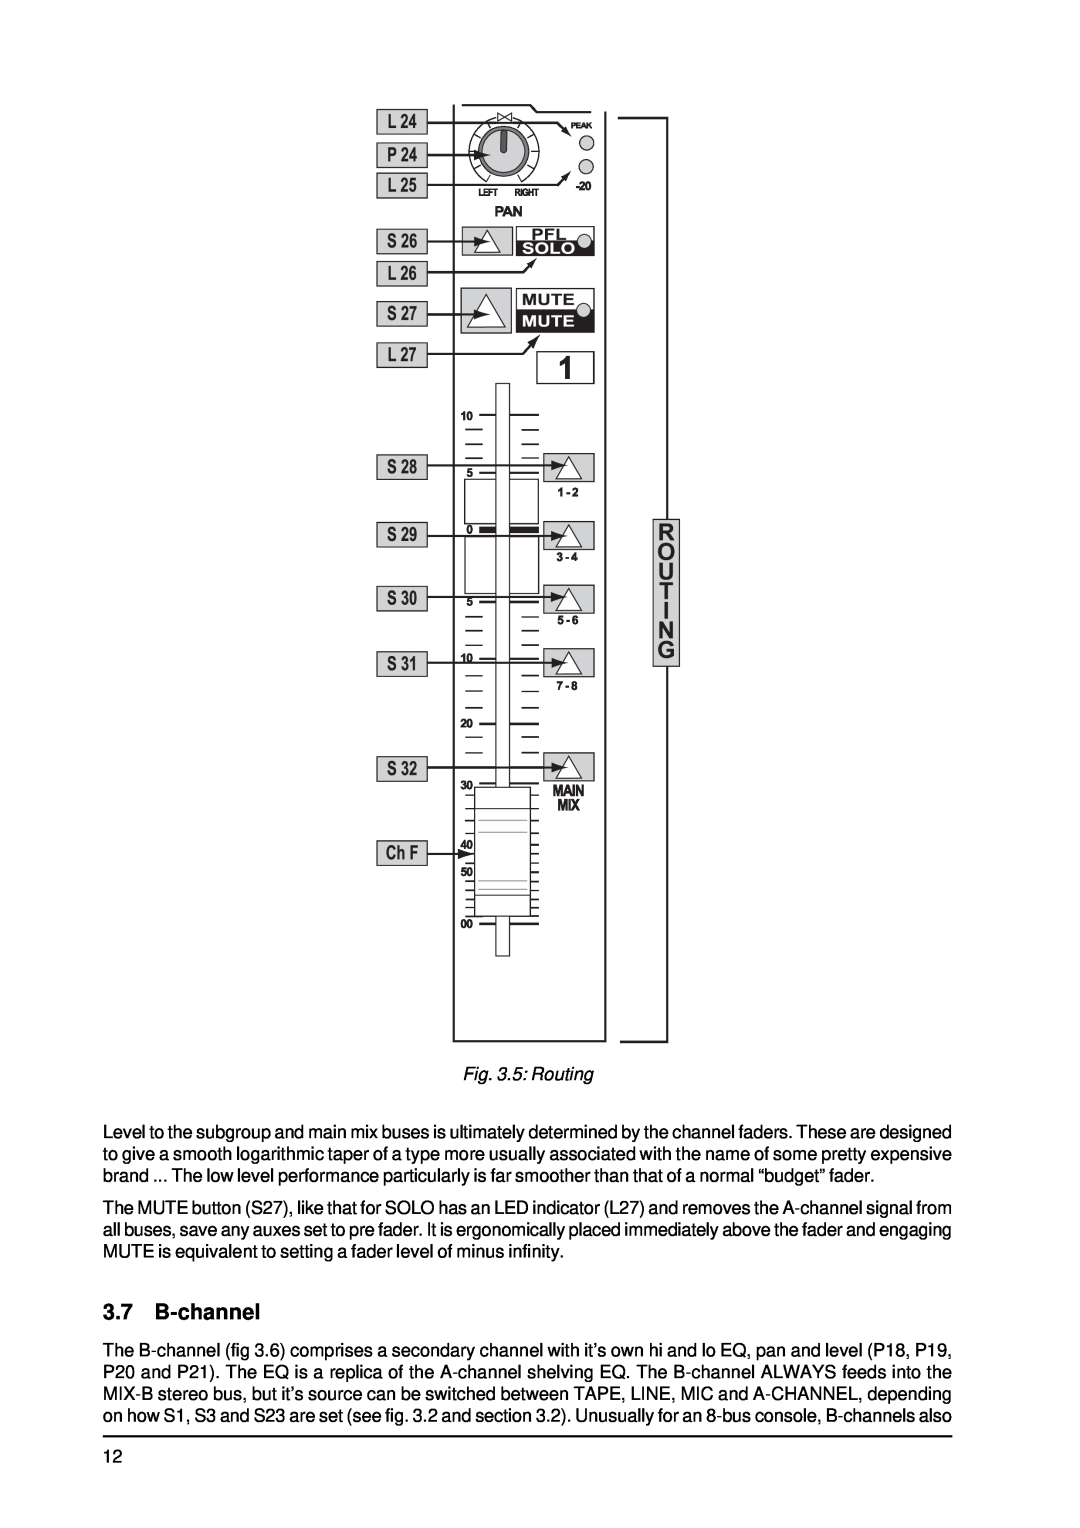 Behringer MX9000 user manual B-channel, 5 Routing 